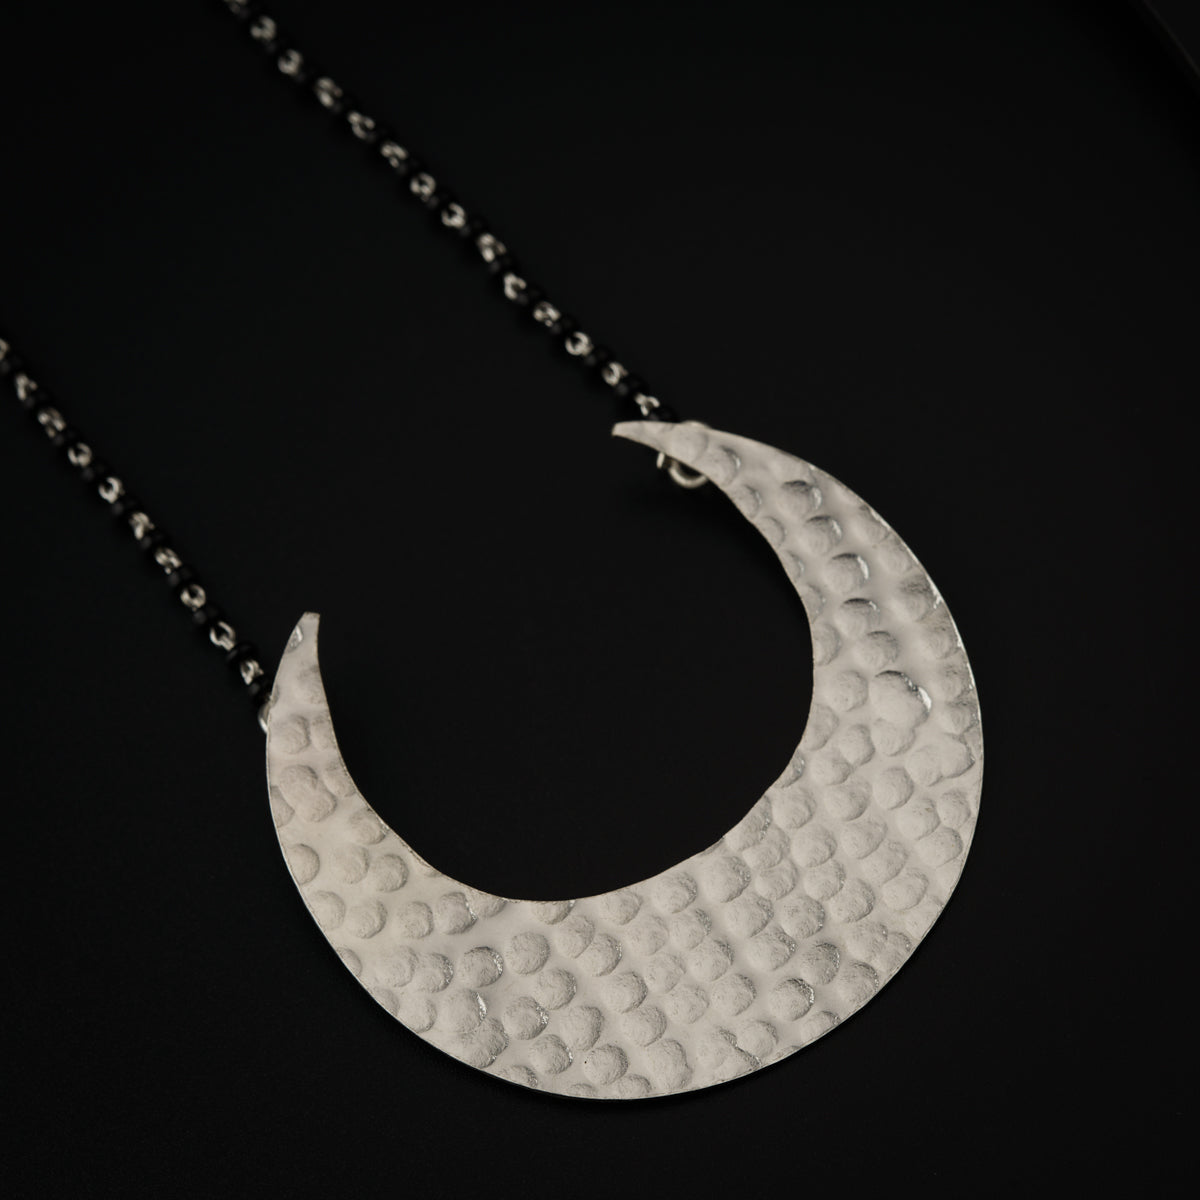 a silver crescent necklace on a black background